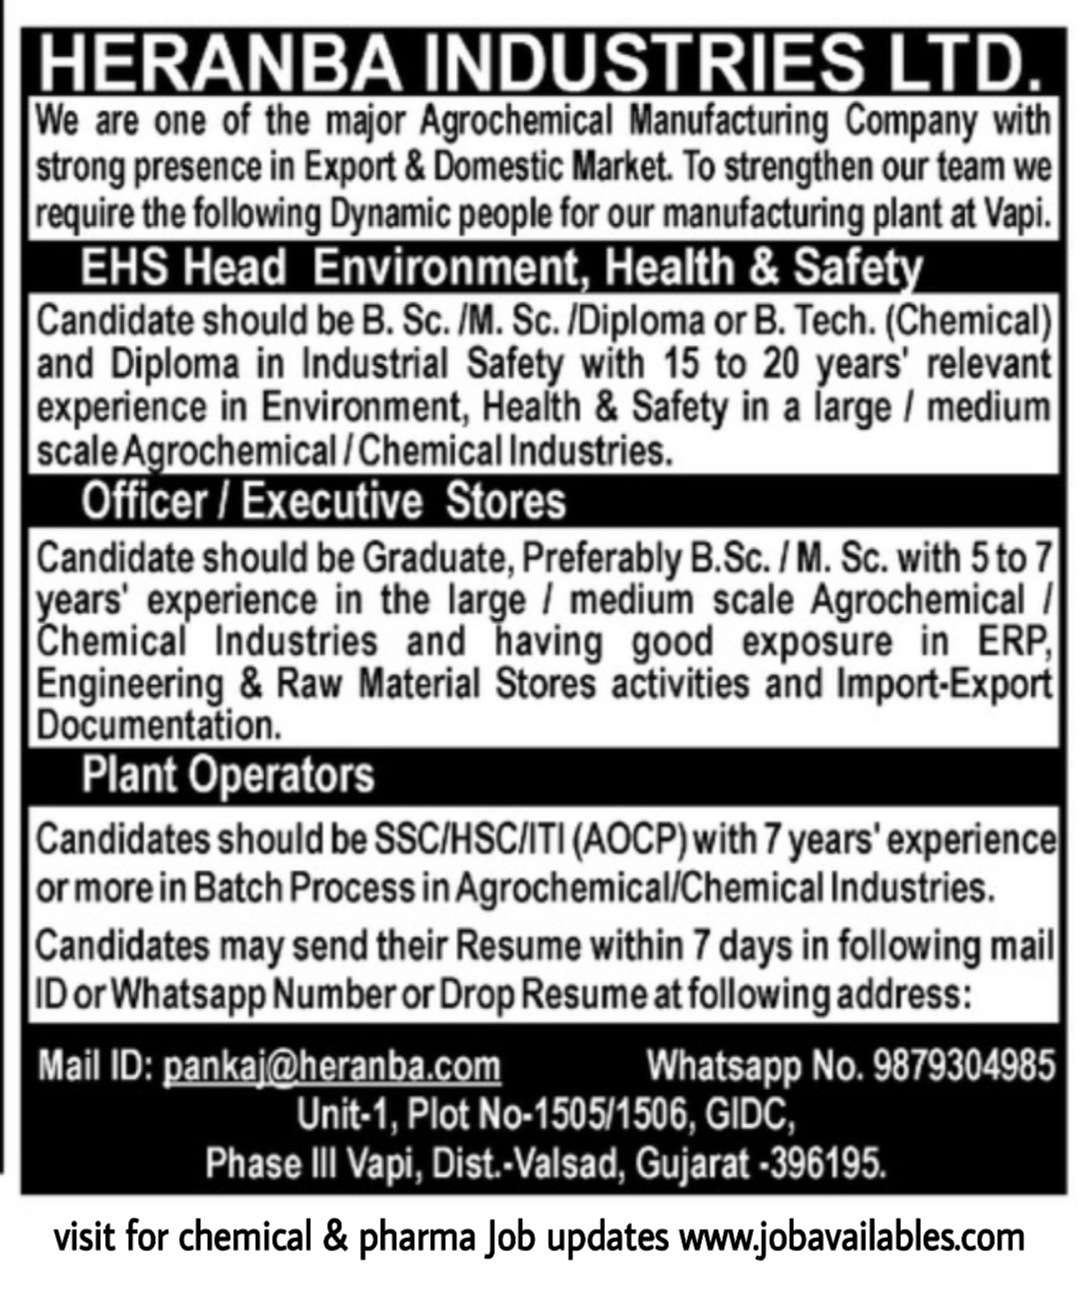 Job Availables, Heranba Industries Ltd Job Opening For Plant Operator/ EHS Head / Stores